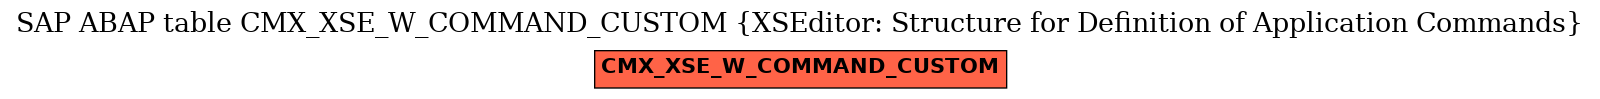 E-R Diagram for table CMX_XSE_W_COMMAND_CUSTOM (XSEditor: Structure for Definition of Application Commands)